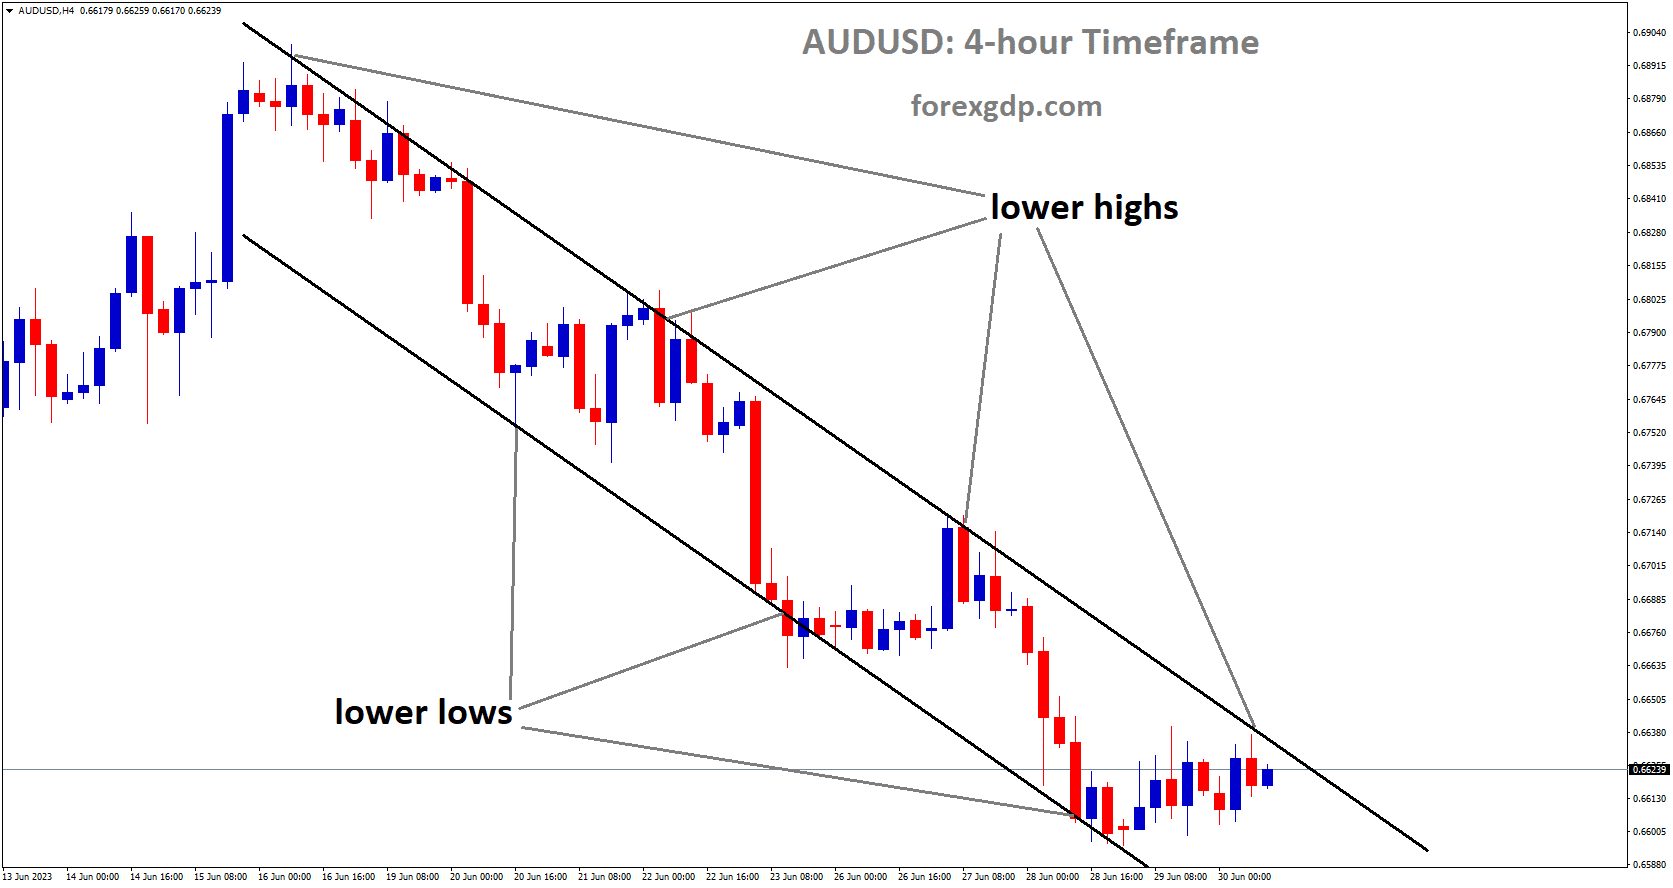 AUDUSD is moving in Descending channel and the market has reached lower high area of the channel.